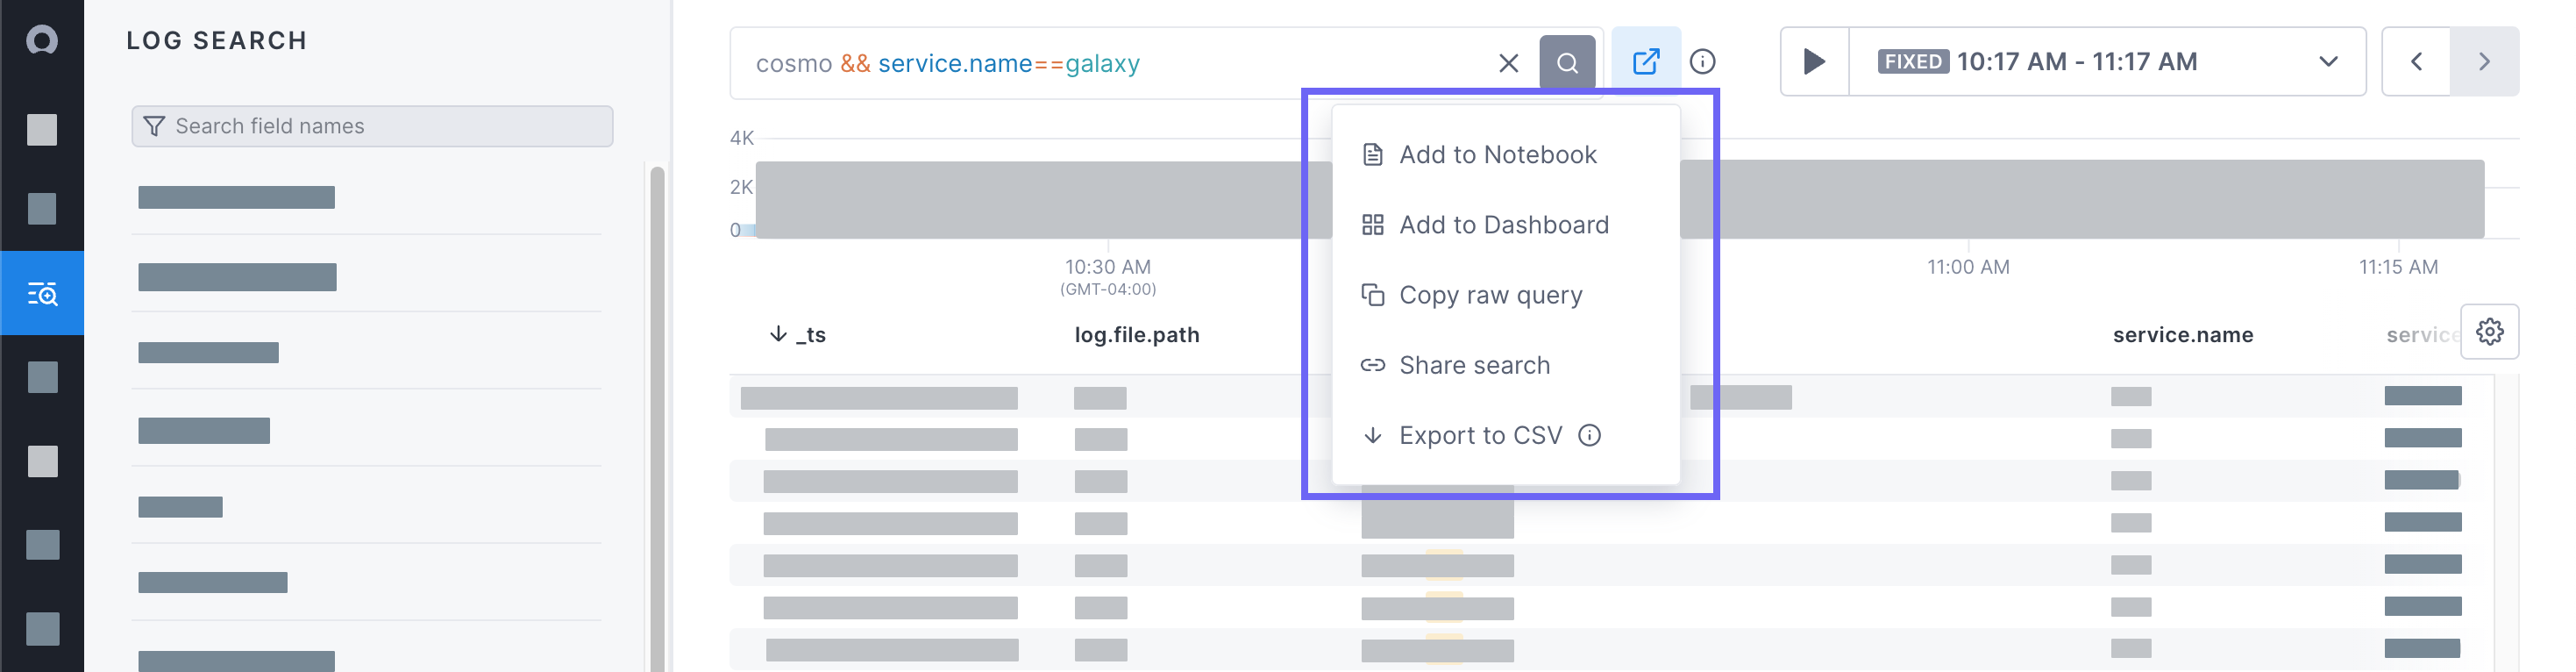 Export icon shows new options, including add to notebook, copy raw query, and share search.